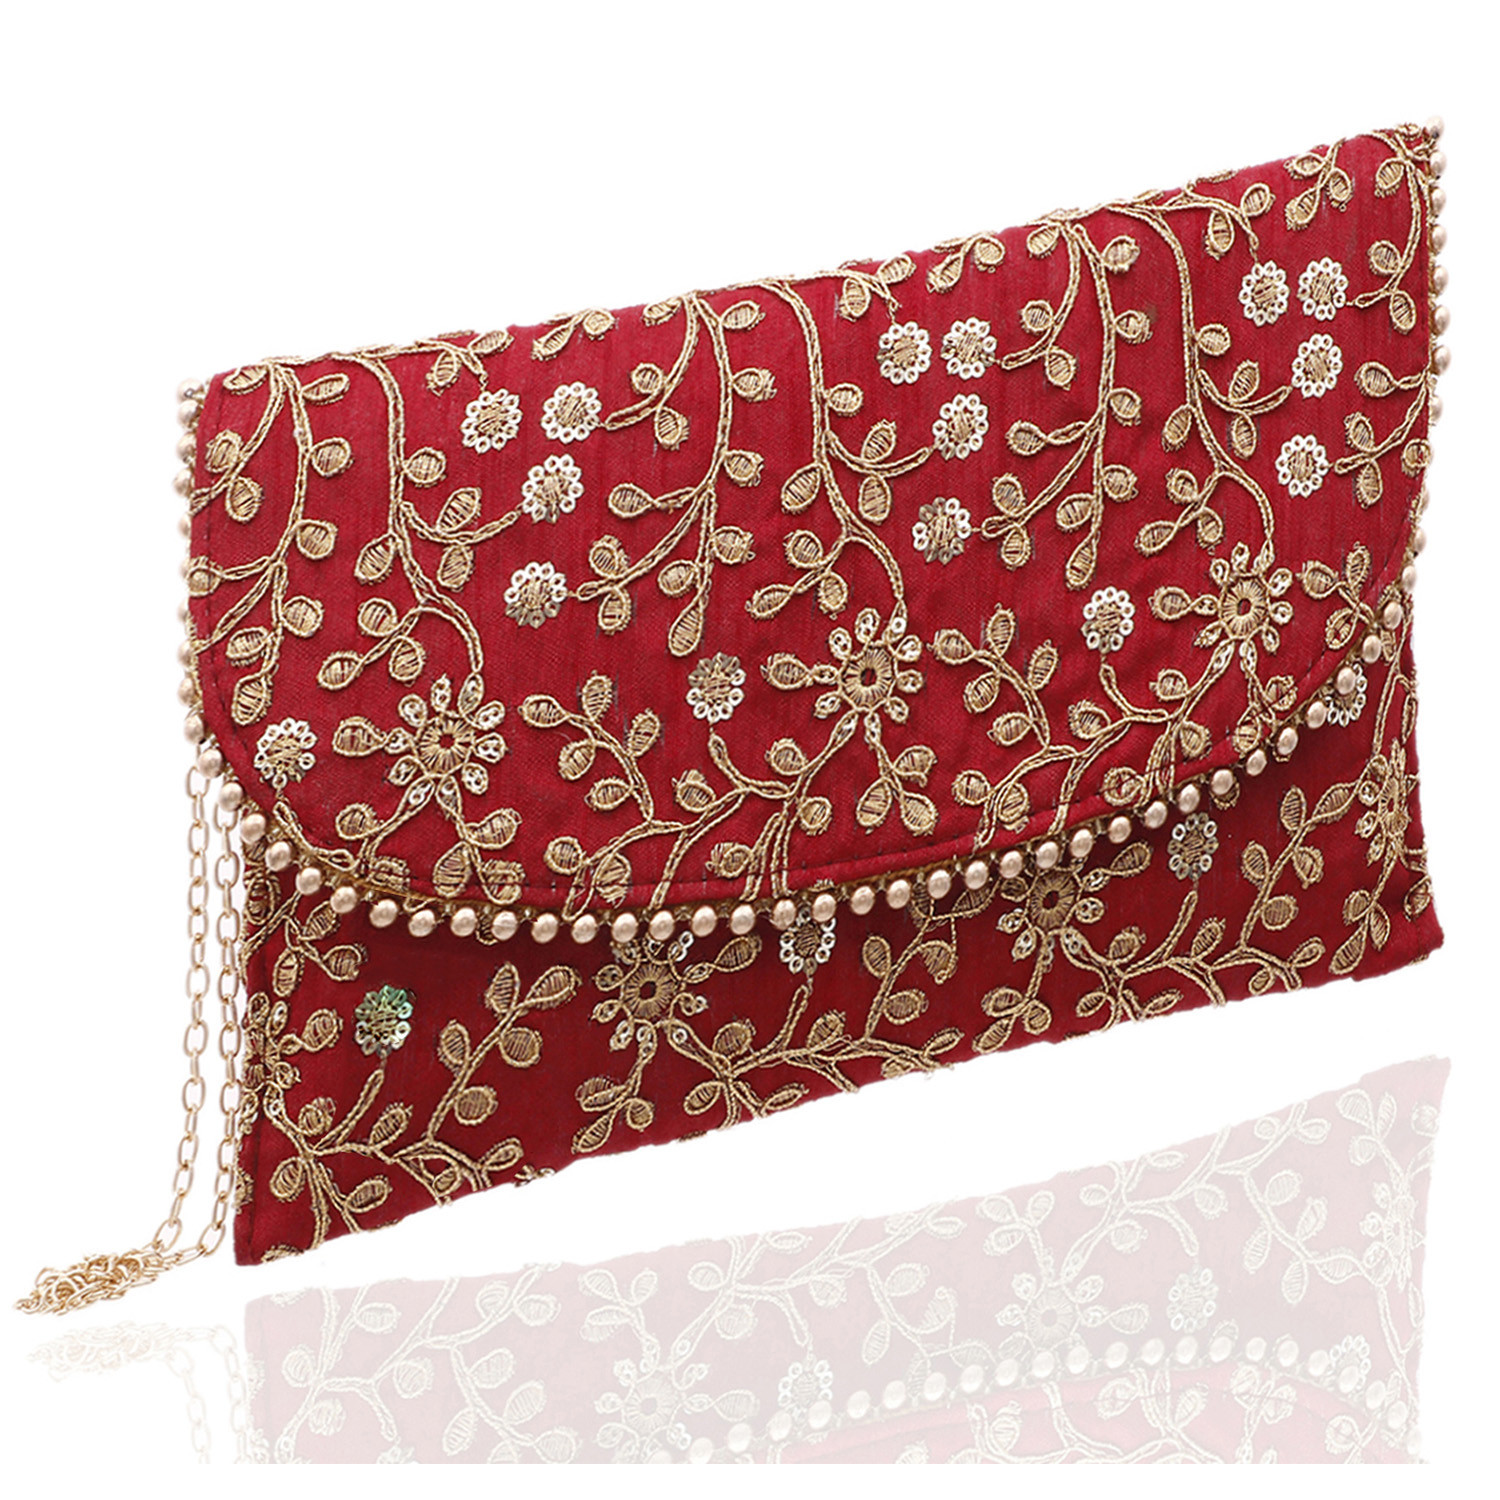 Kuber Industries Embroidery Golden Pearl Border Clutch|Hand Purse & Pearls Handle With Magnetic Lock For Woman,Girls (Maroon)